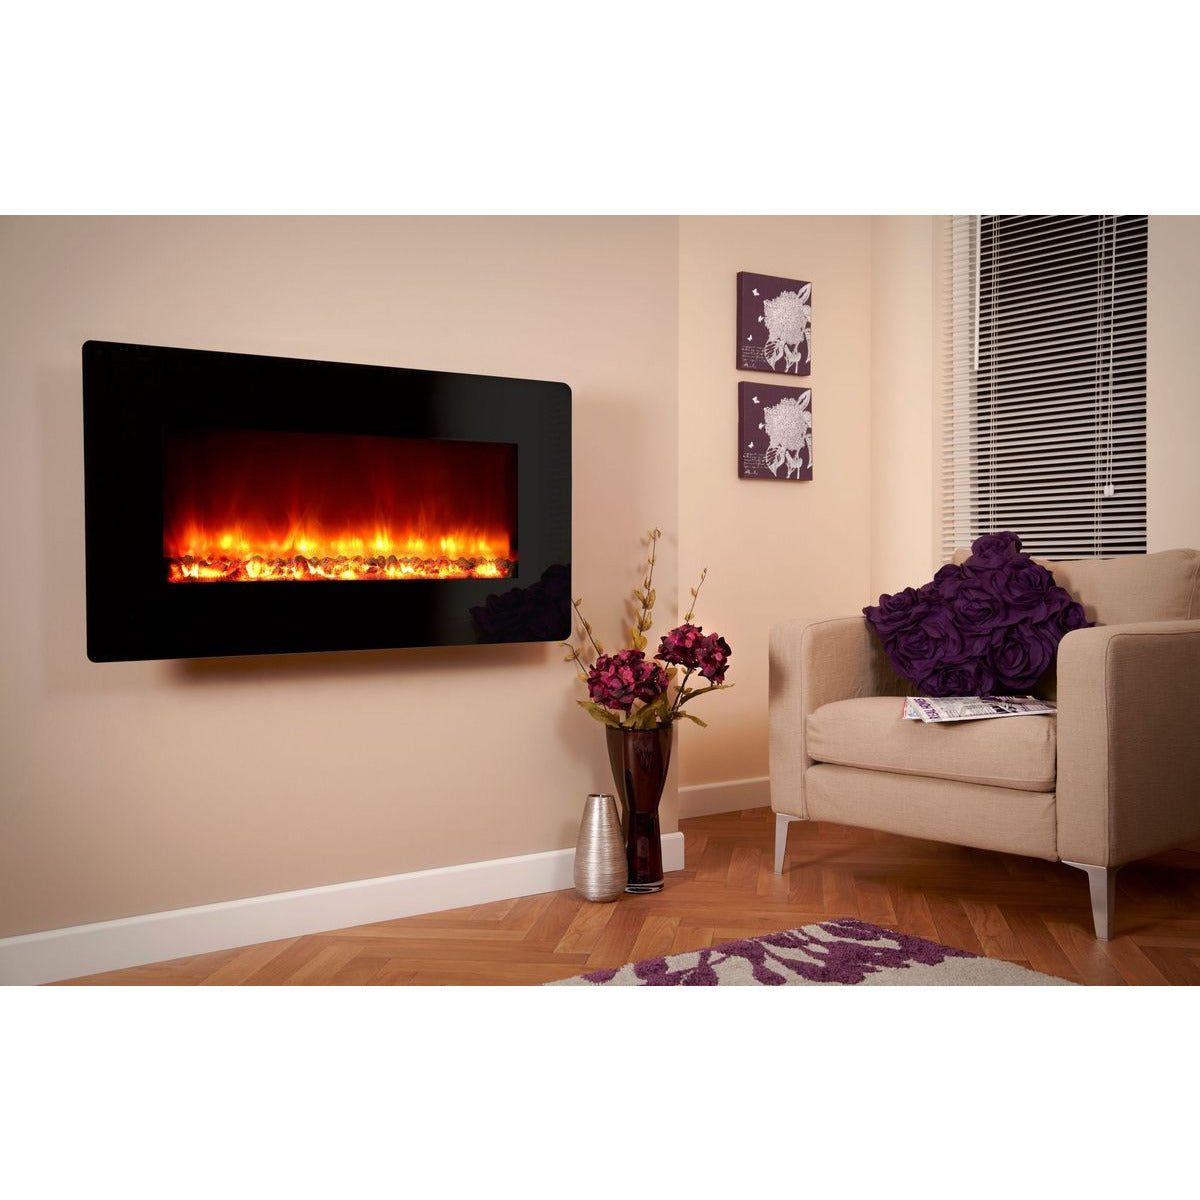 Celsi Electriflame XD 1100 Wall Mounted Electric Fire - Black Glass - PadioLiving - Celsi Electriflame XD 1100 Wall Mounted Electric Fire - Black Glass - Electric Fires - PadioLiving